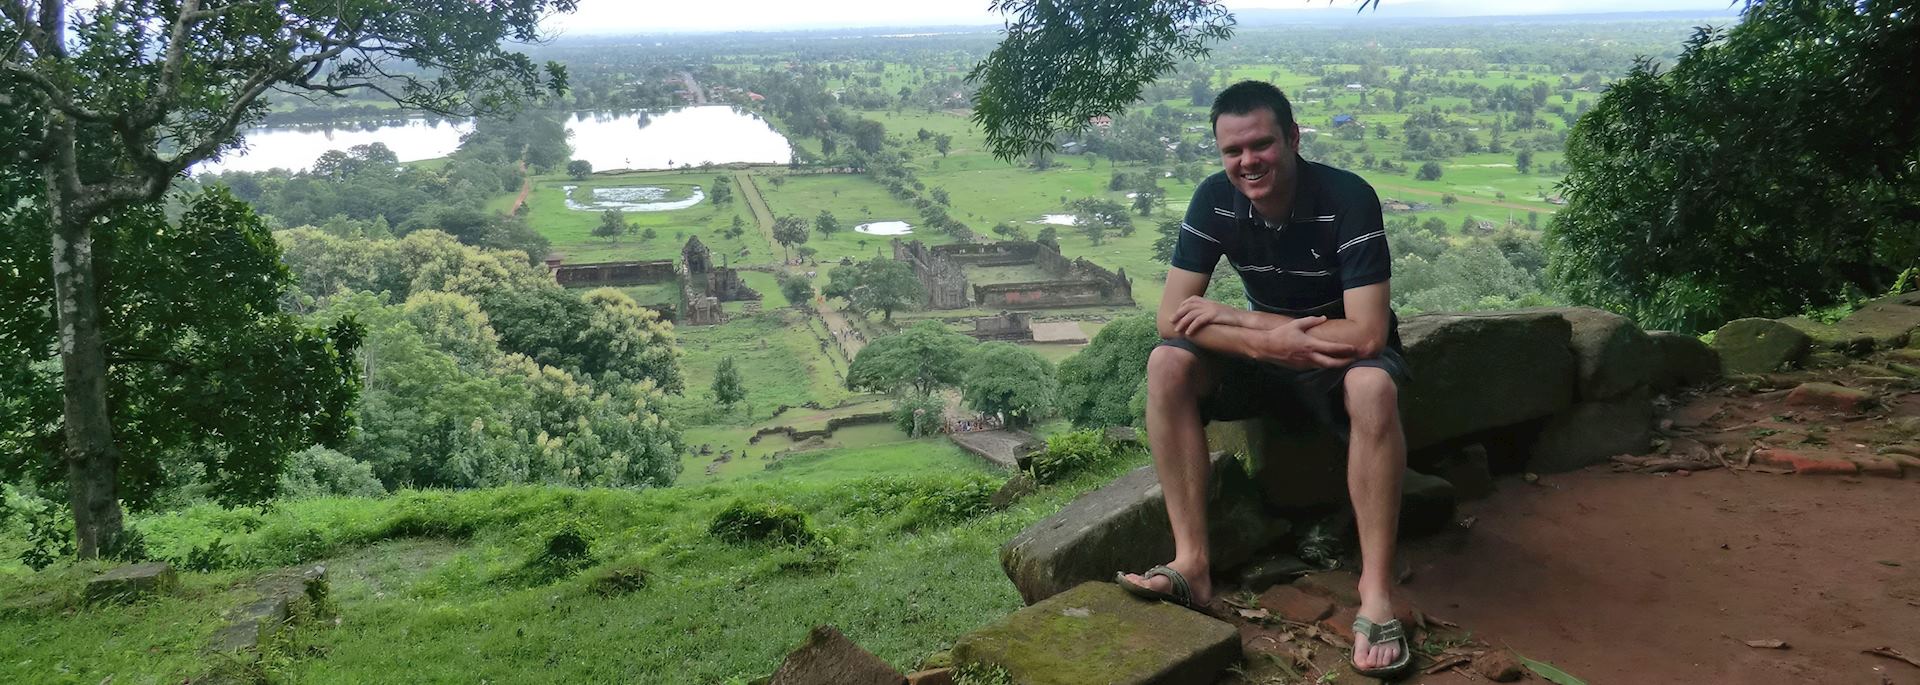 William and the panoramic view at Wat Phou in Southern Laos